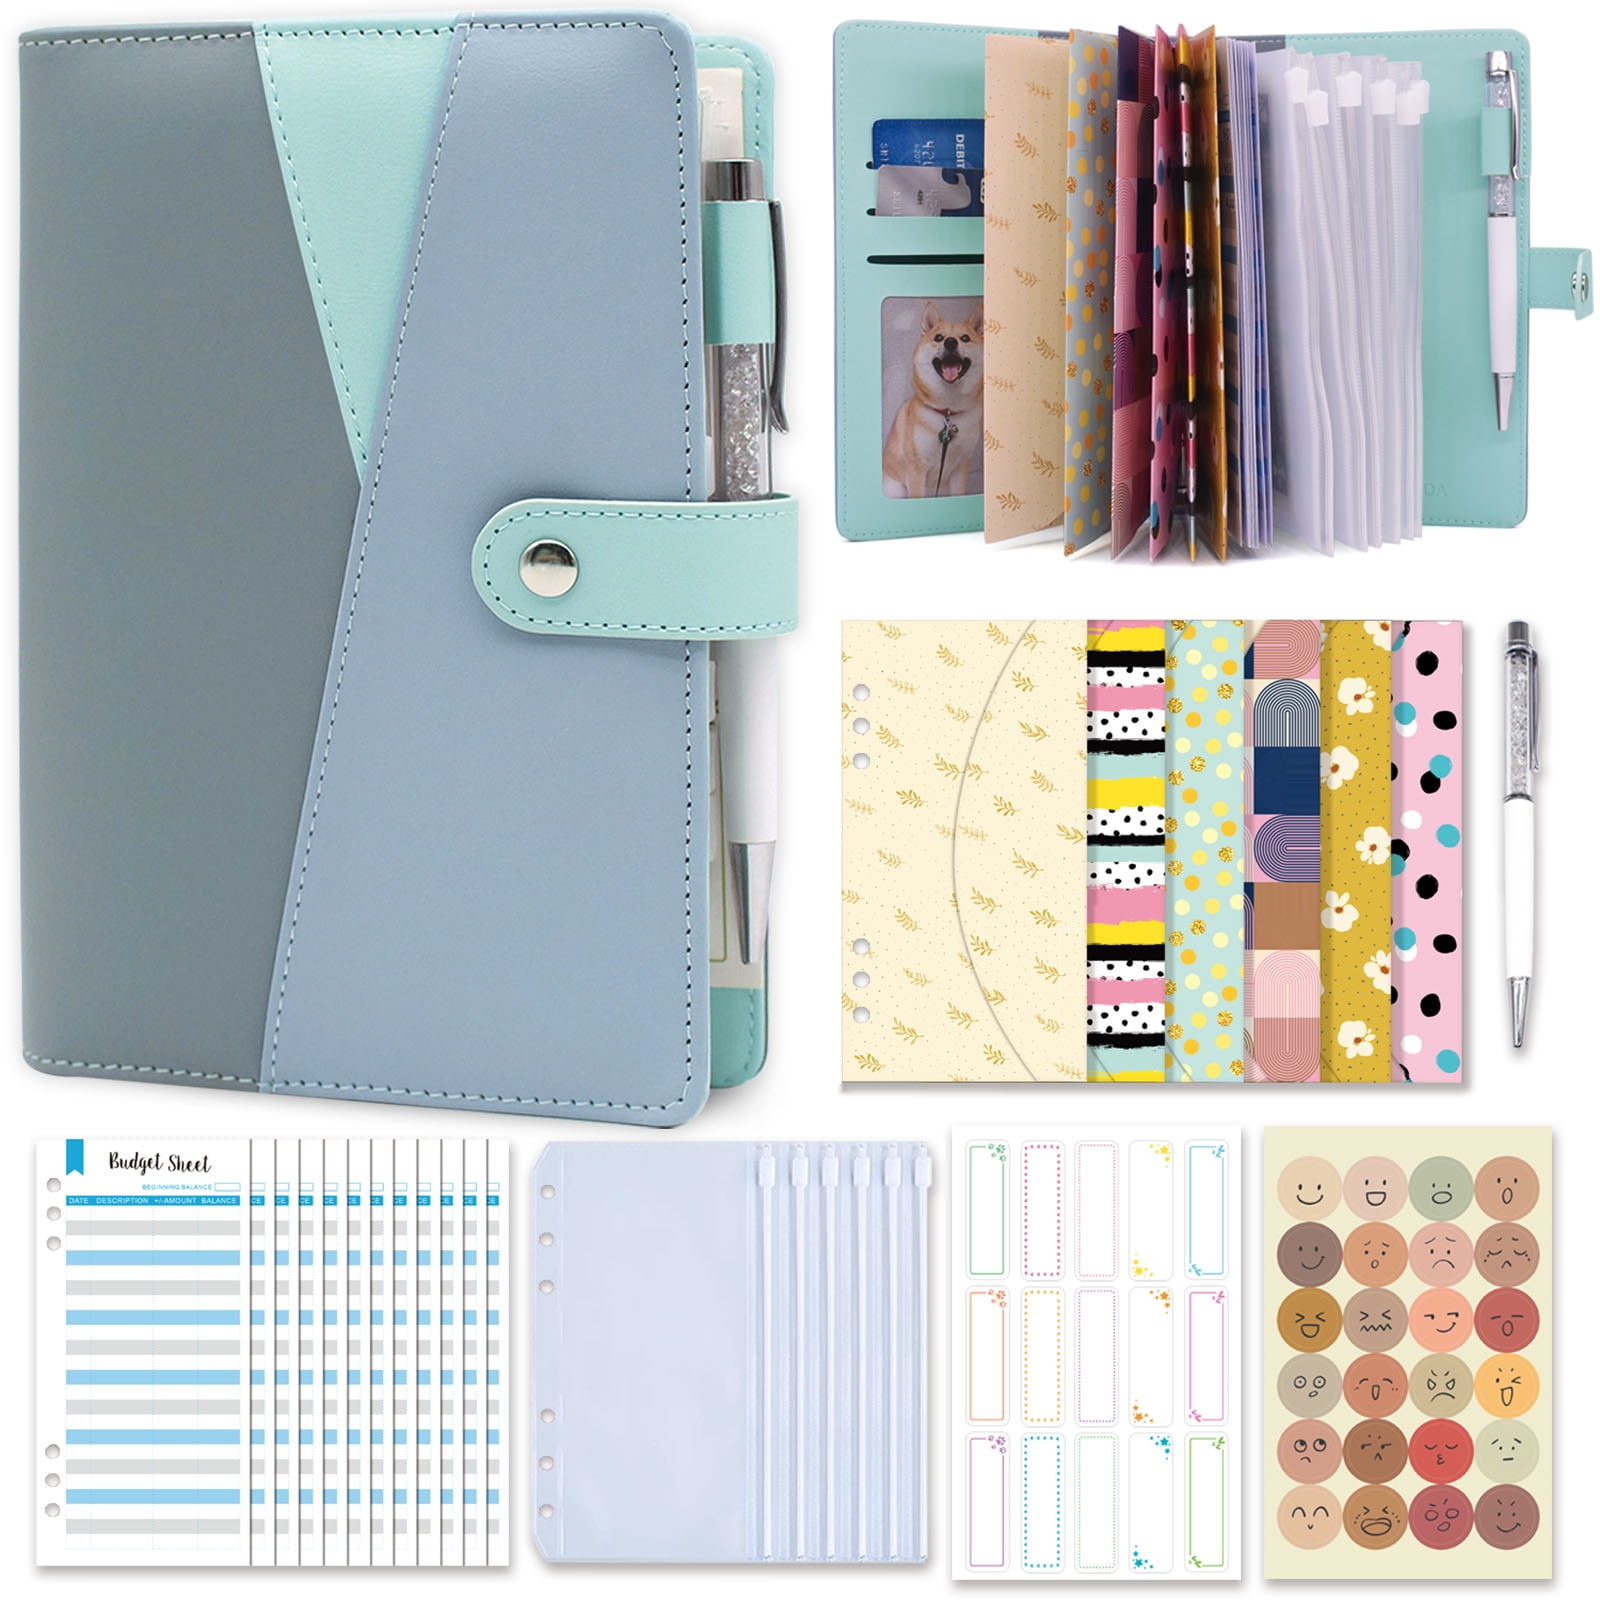  7Felicity Budget Binder,Leather Rings Planner, 6-Ring